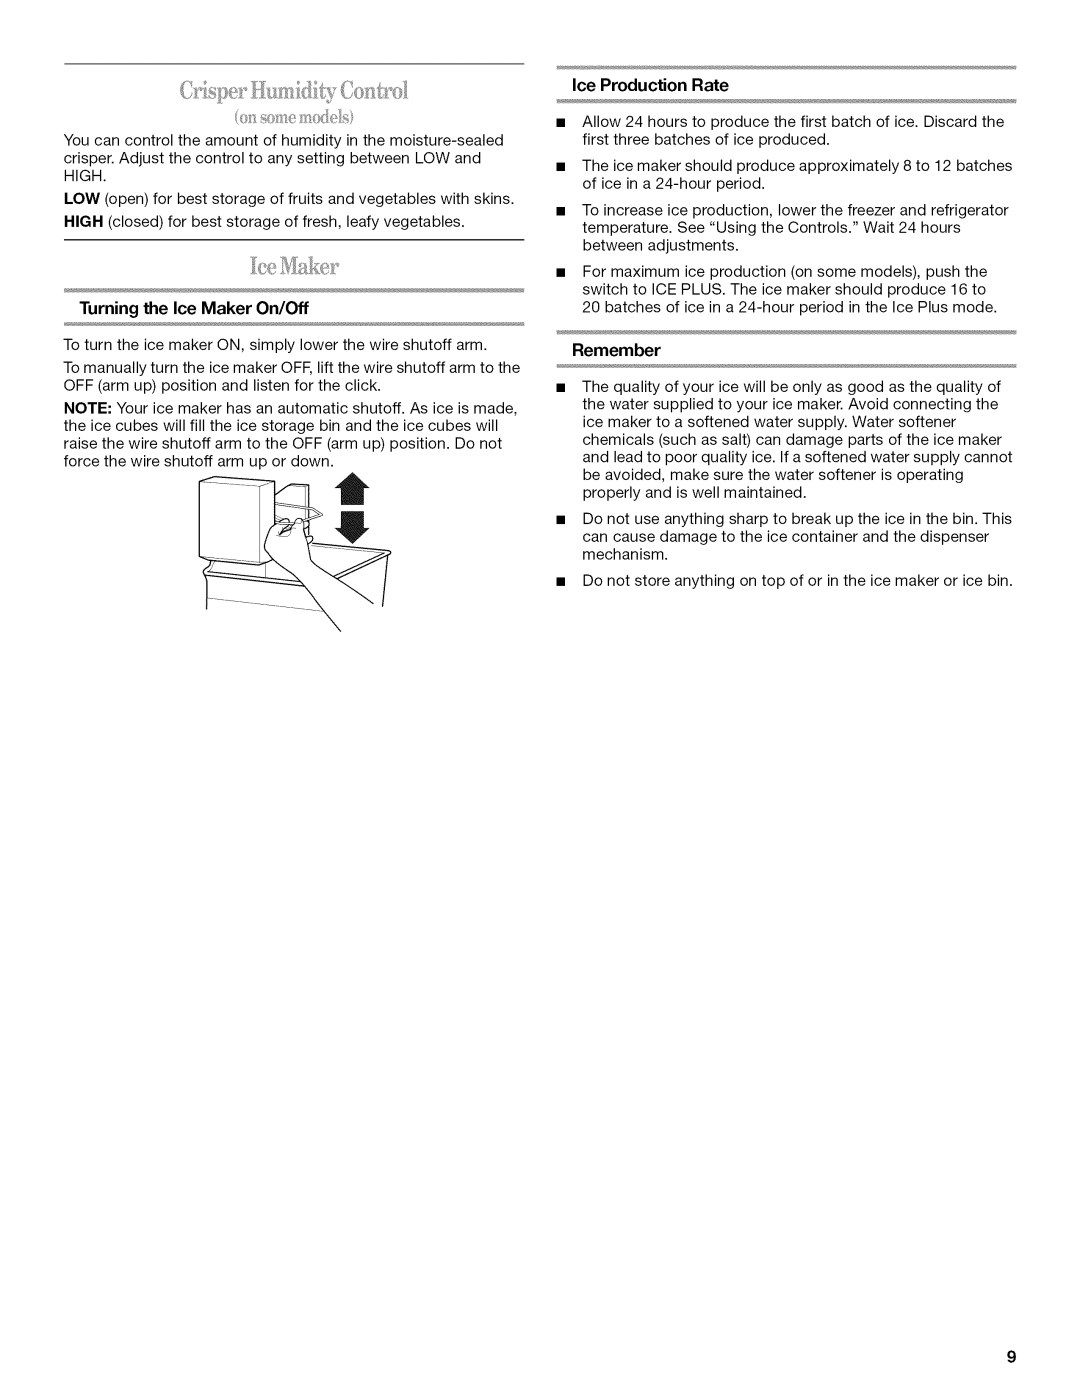 Whirlpool W10131412A installation instructions Turning the Ice Maker On/Off, Remember, Ice Production Rate 